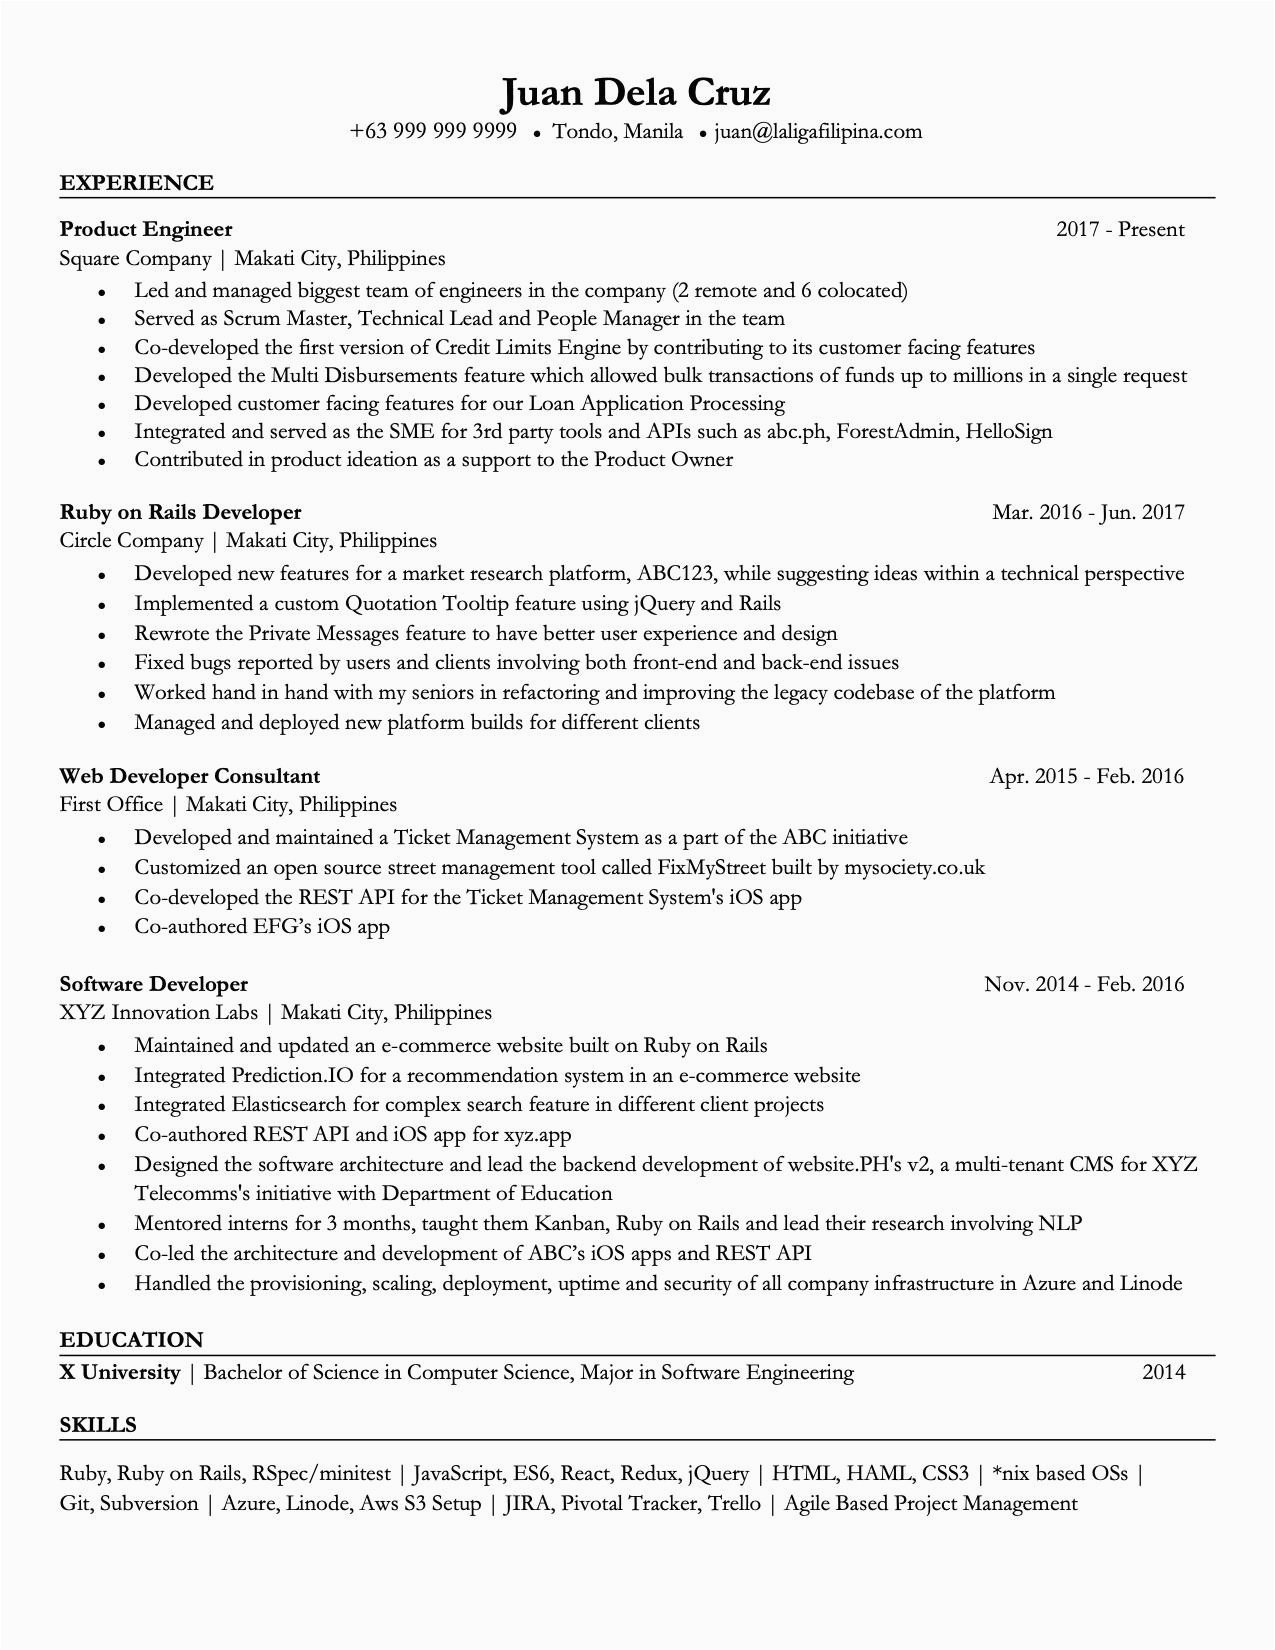 Net Sample Resume 4 Years Experience Web Developer 4 Yrs Experience Interested In Fintech Healthcare